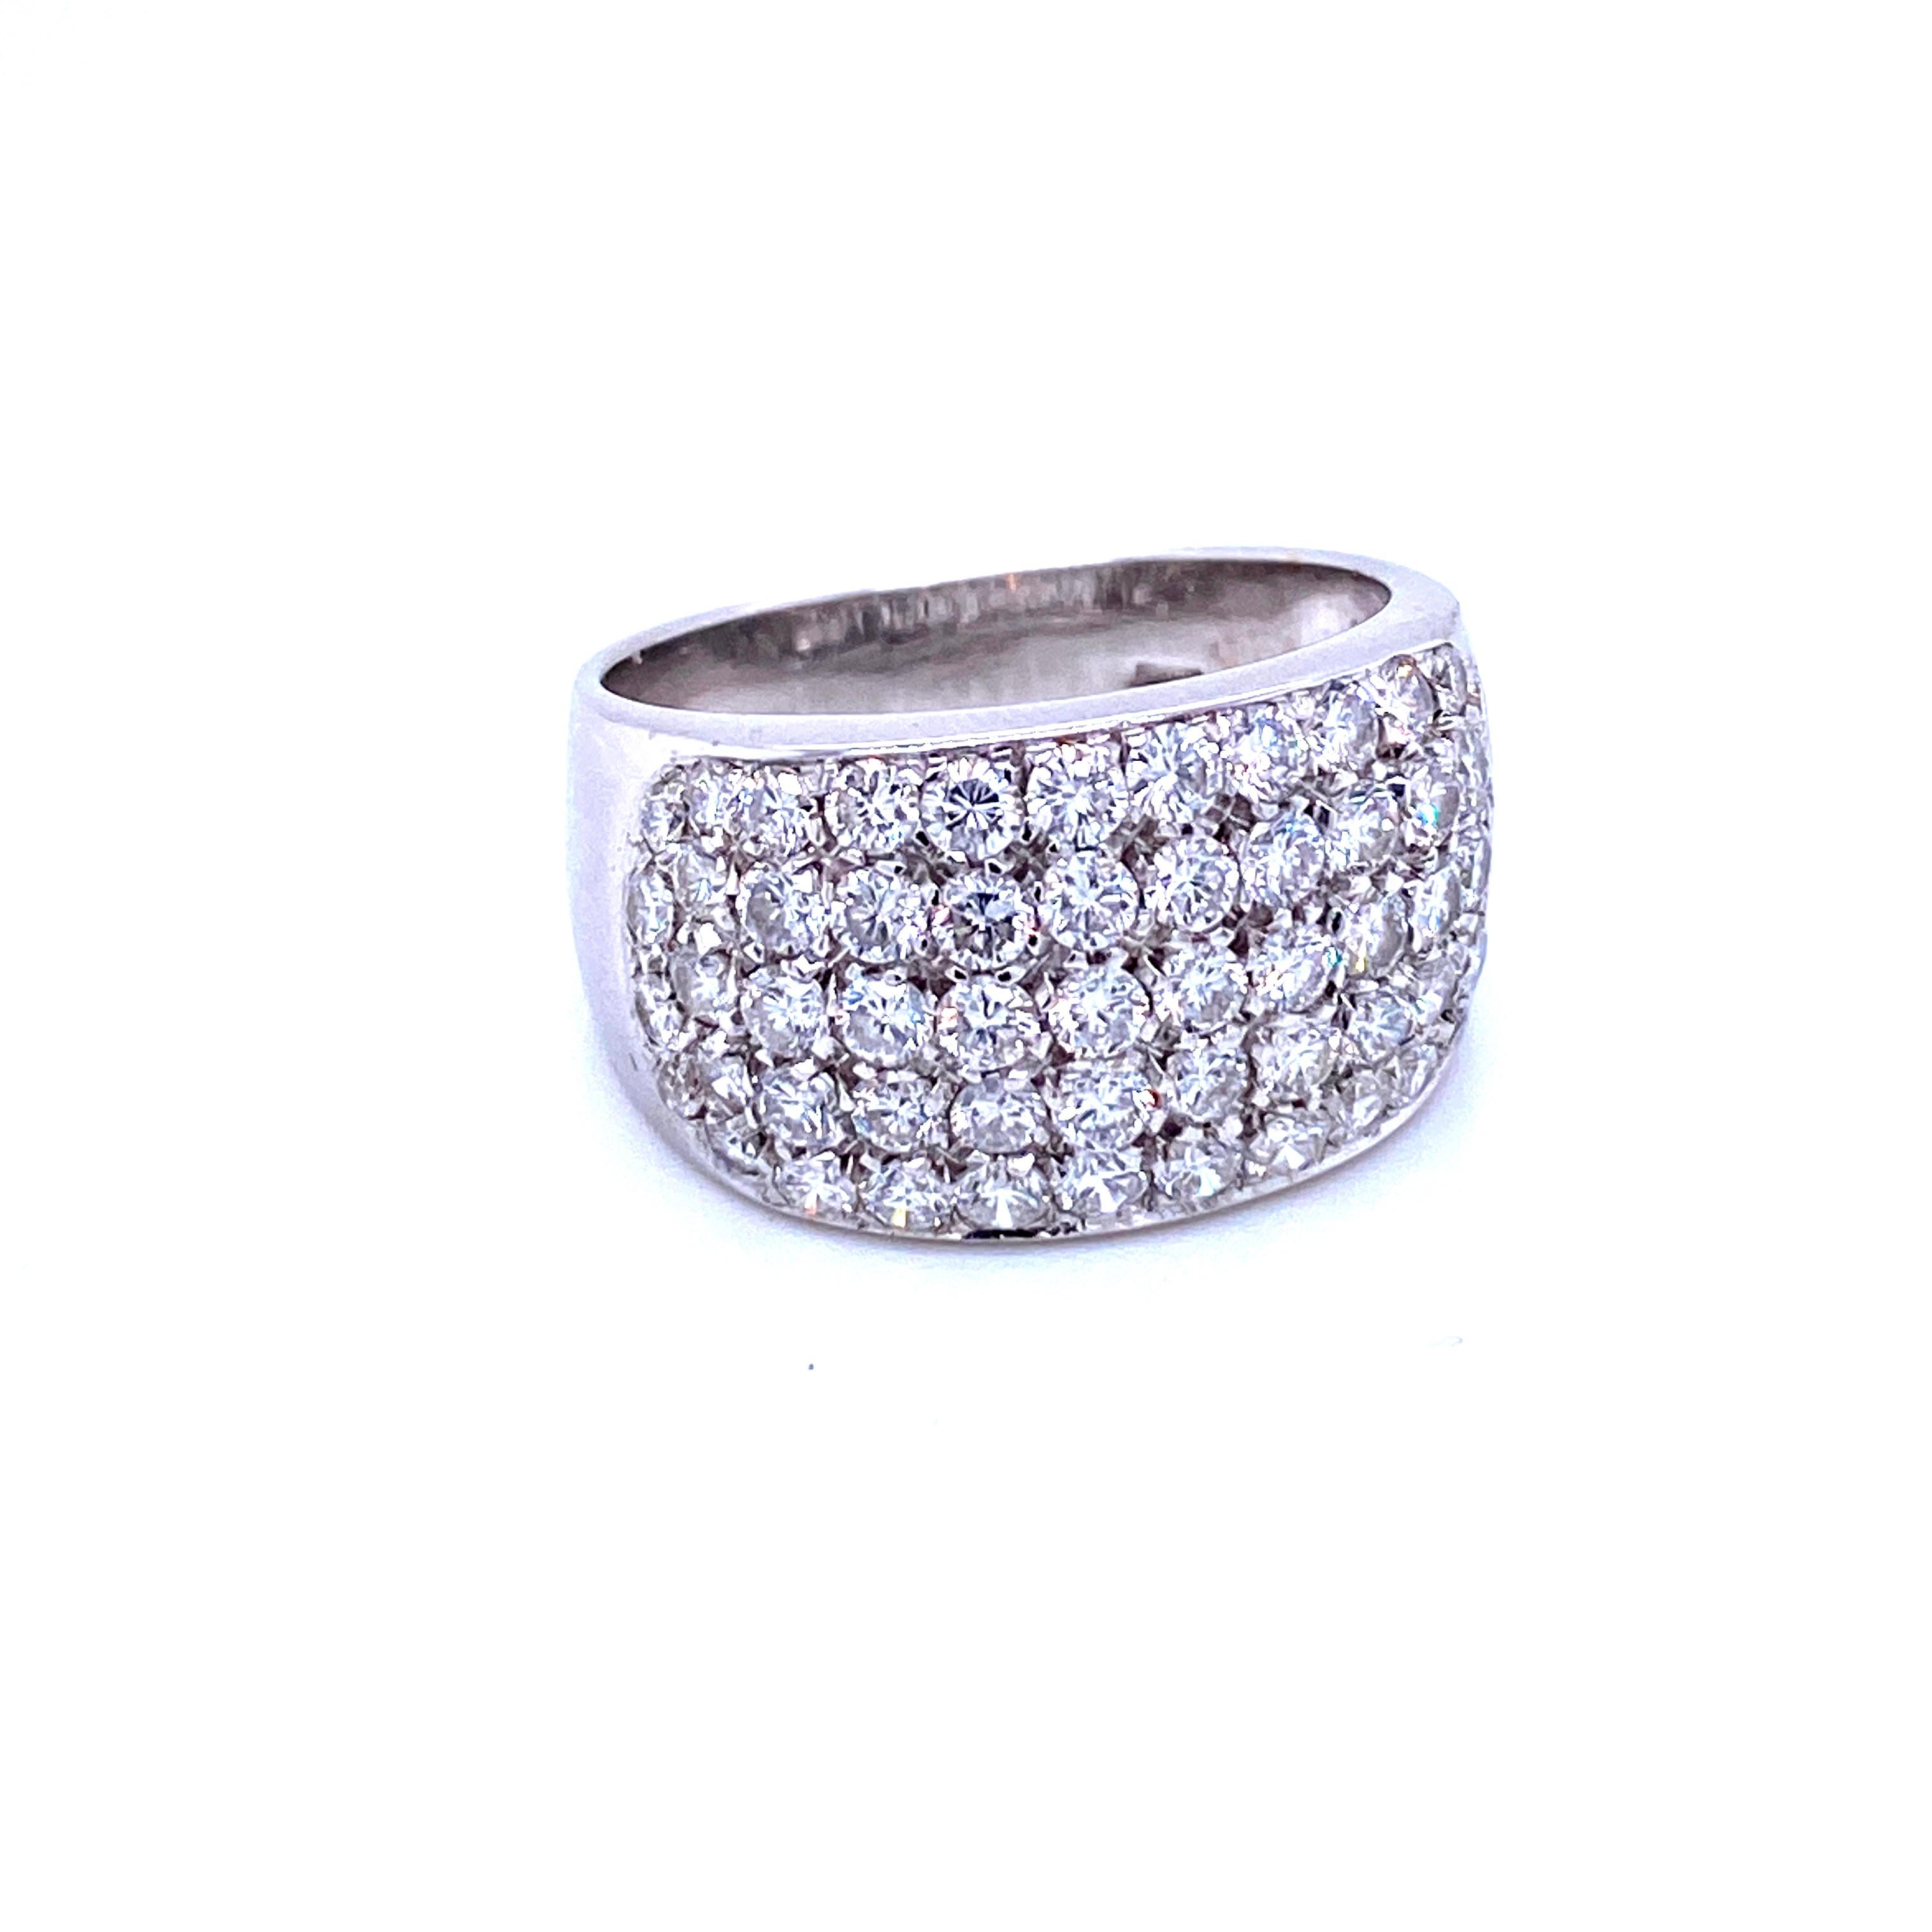 A contemporary design Diamond band ring set in 18k white gold, it features 3 carats of Sparkling Round brilliant cut diamond, graded G Color VS clarity, pavé setting. When worn there is not a spot on this band without a diamond showing.

CONDITION: